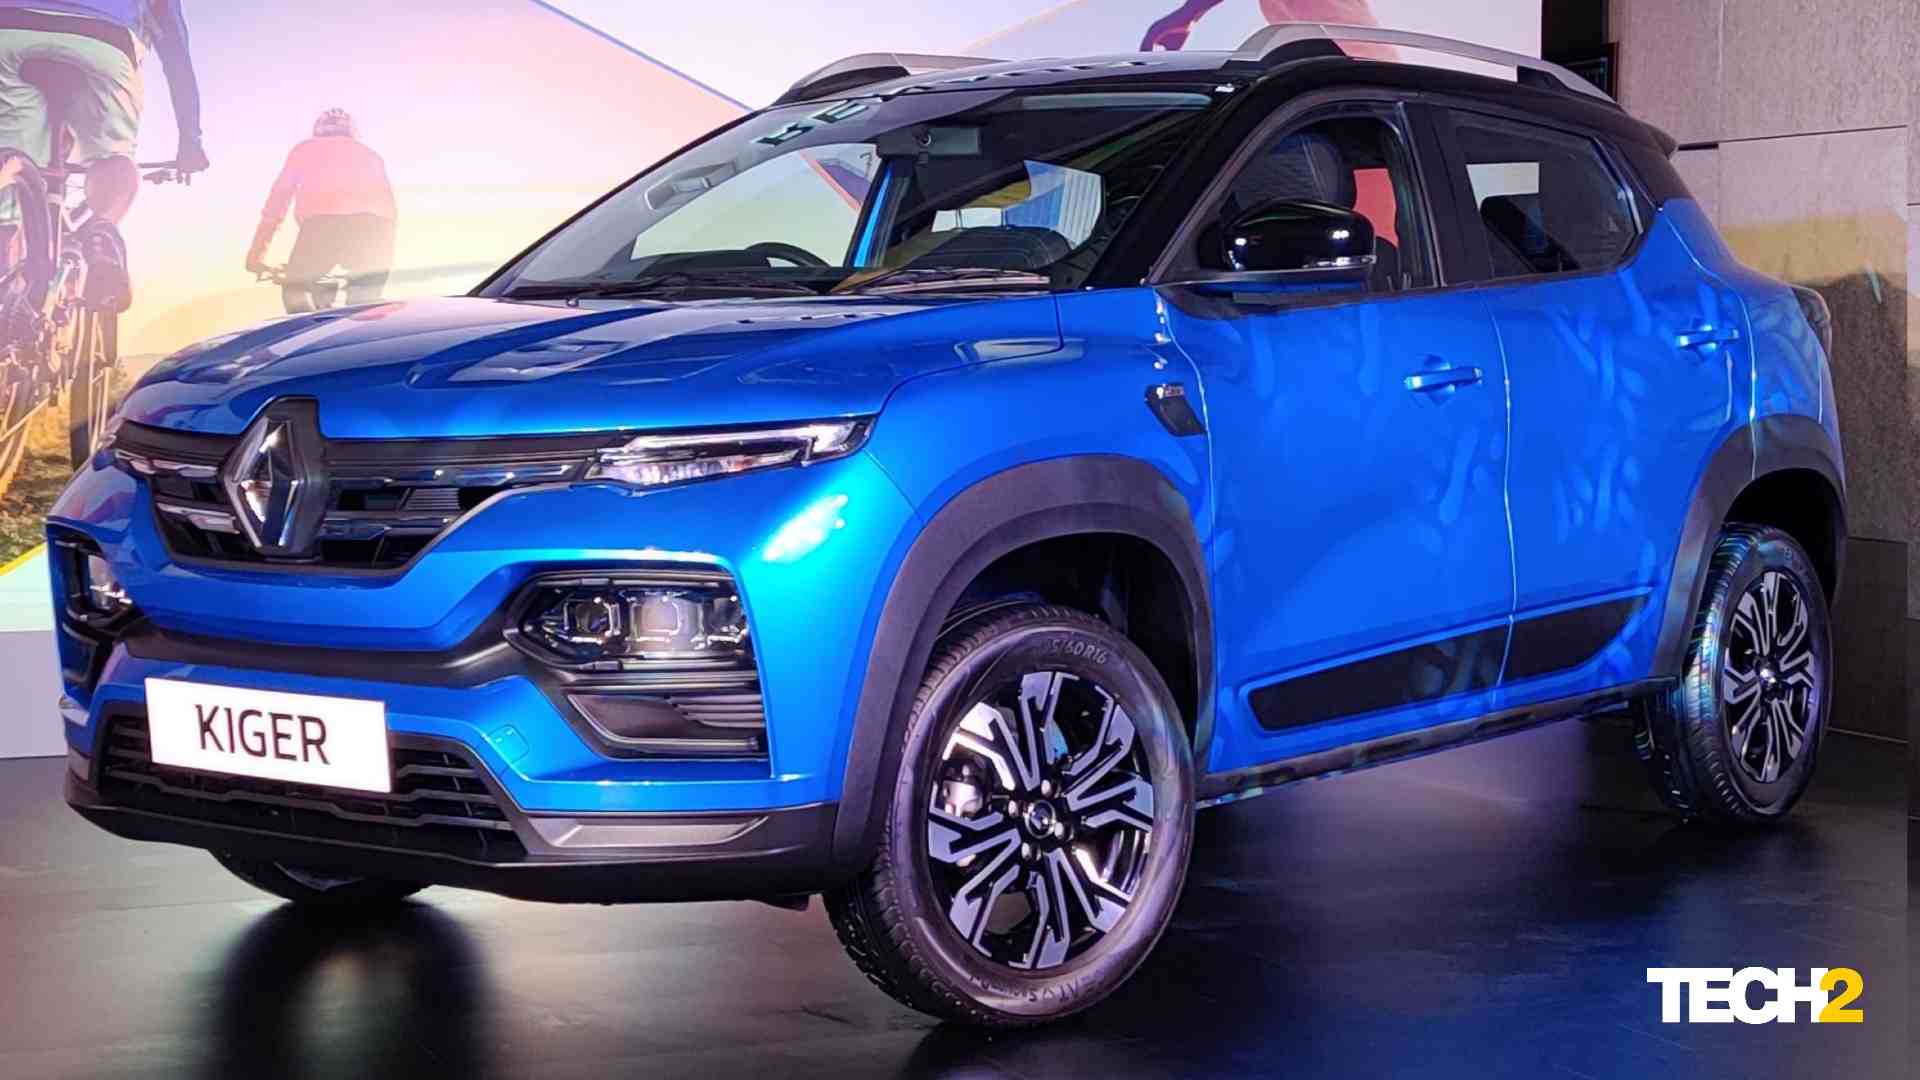  Renault Kiger goes on sale priced from Rs 5.45 lakh: A closer look at its variant-wise prices, features